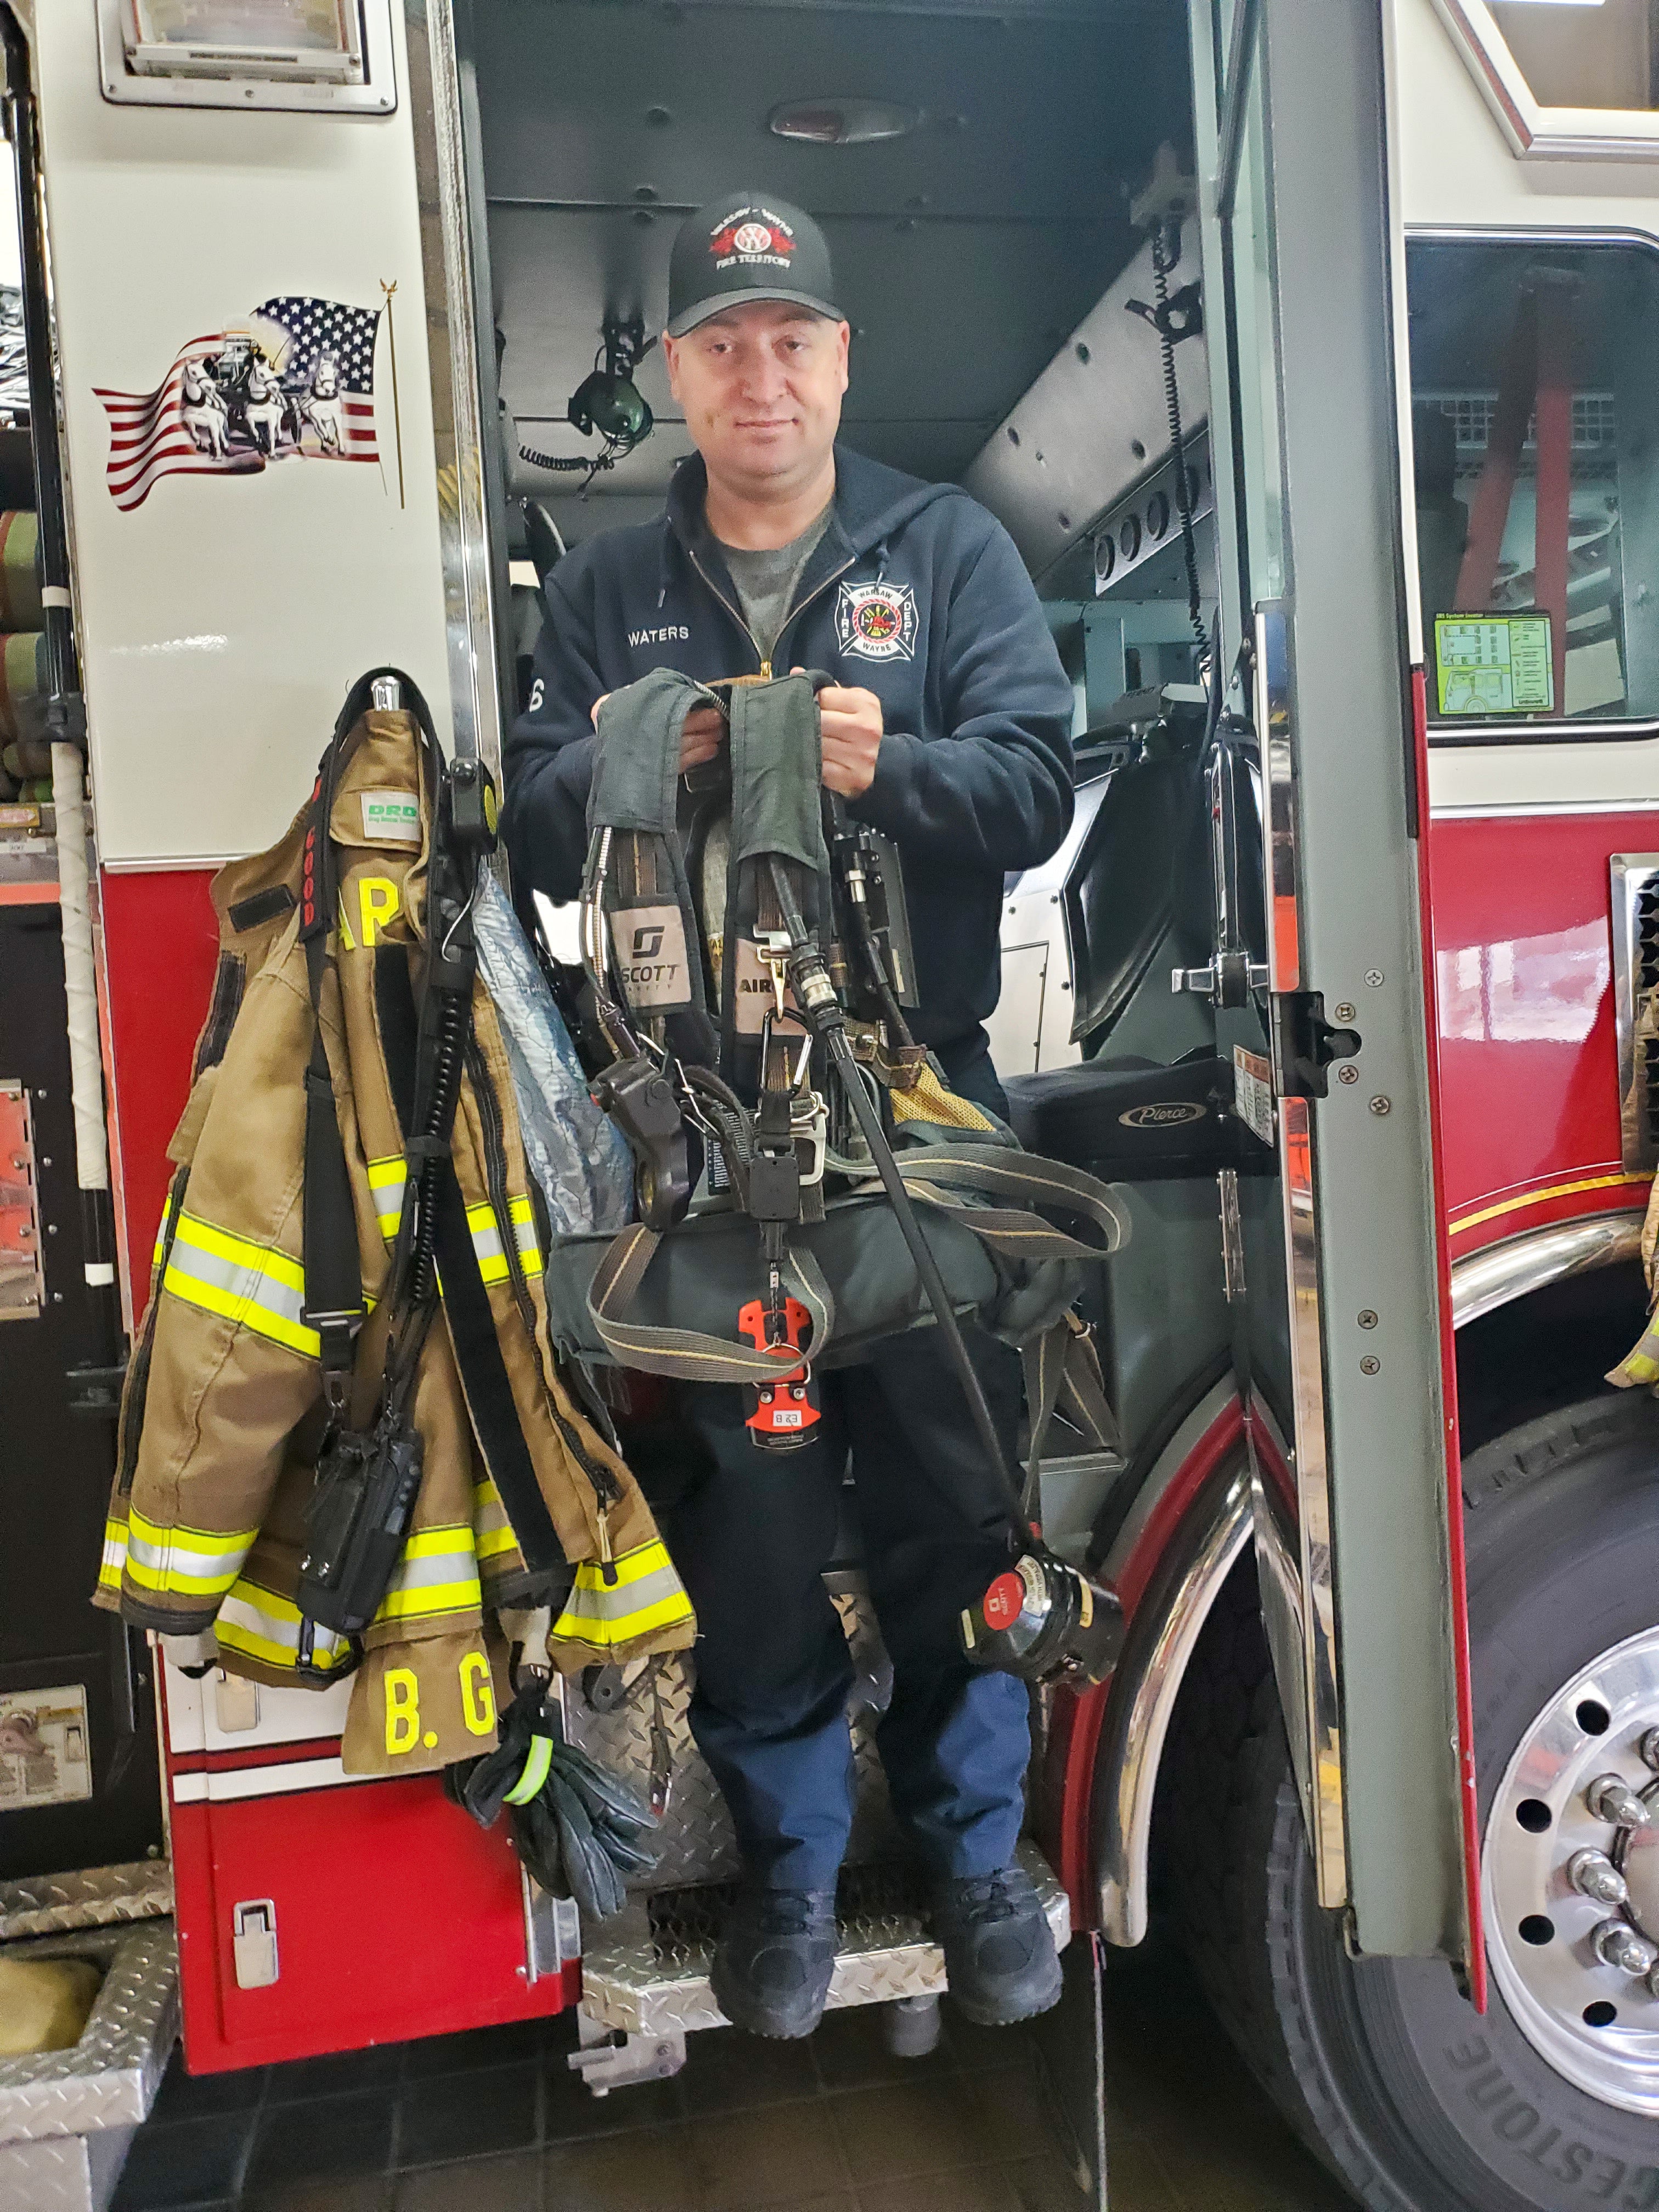 Warsaw-Wayne Fire Territory firefighter Miles stands in the door of a firetruck.